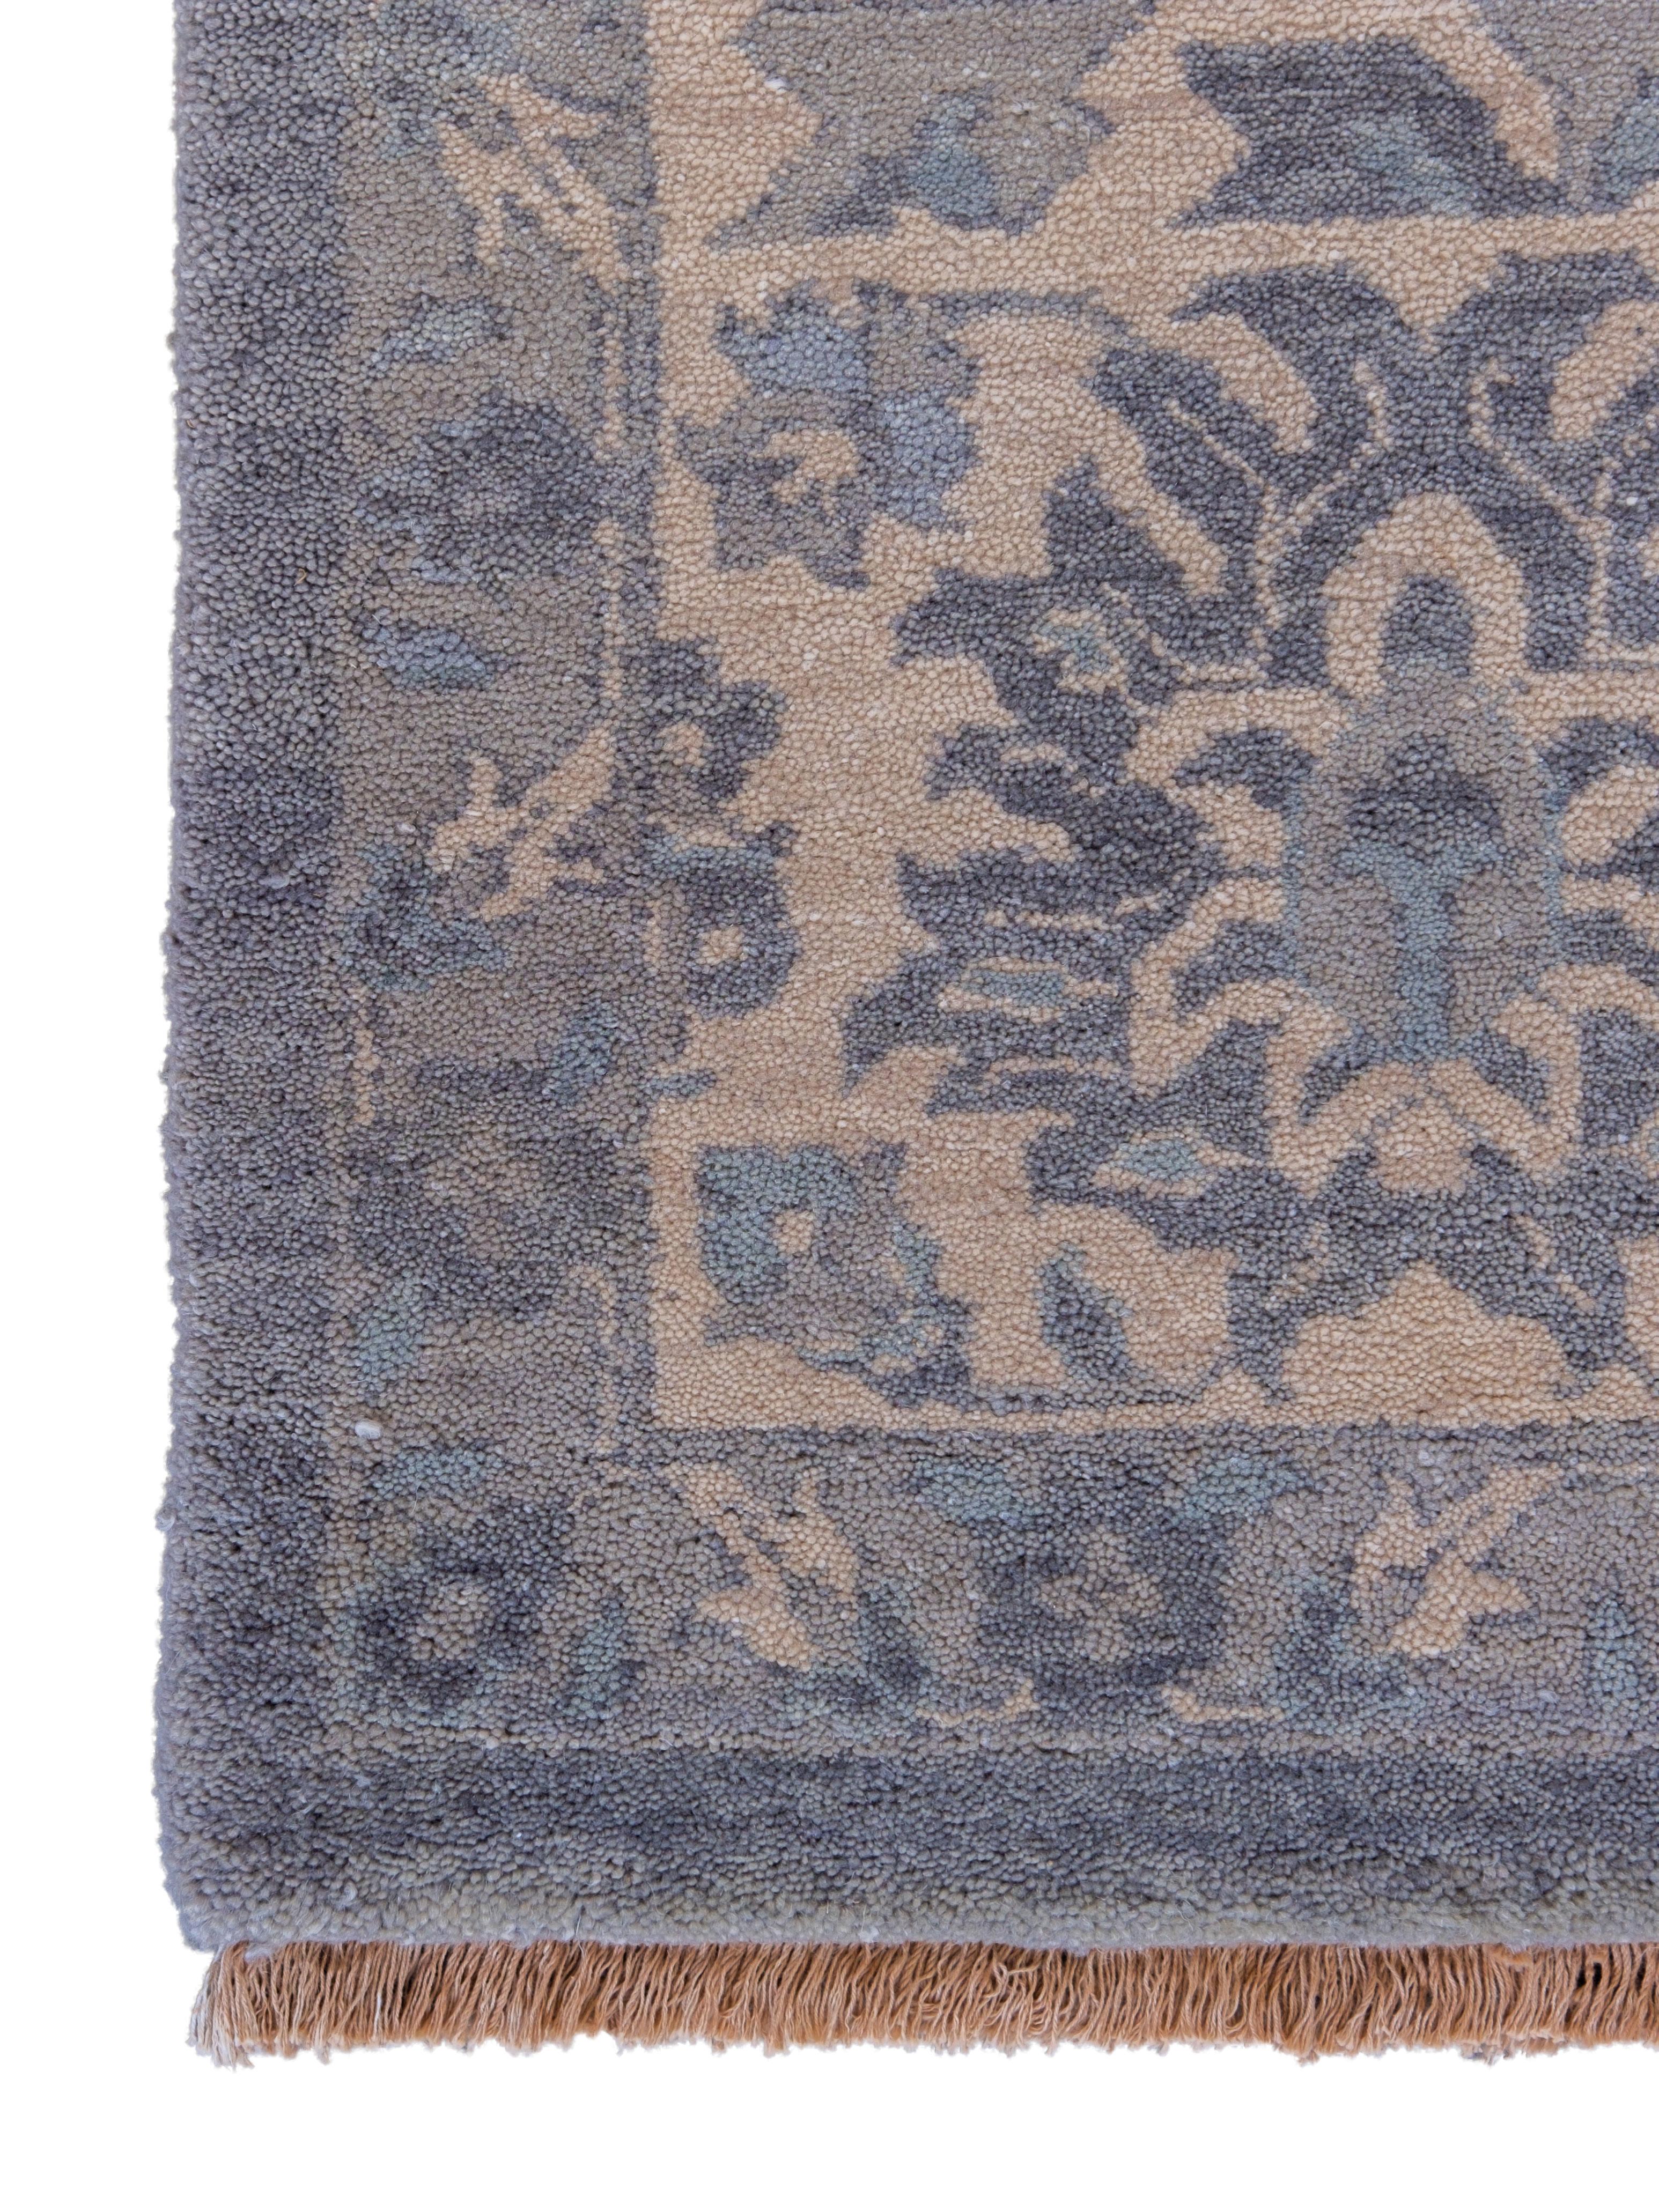 Formal and Transitional Grey Hand-Knotted Wool Persian Carpet, 9' x 12' In New Condition For Sale In New York, NY